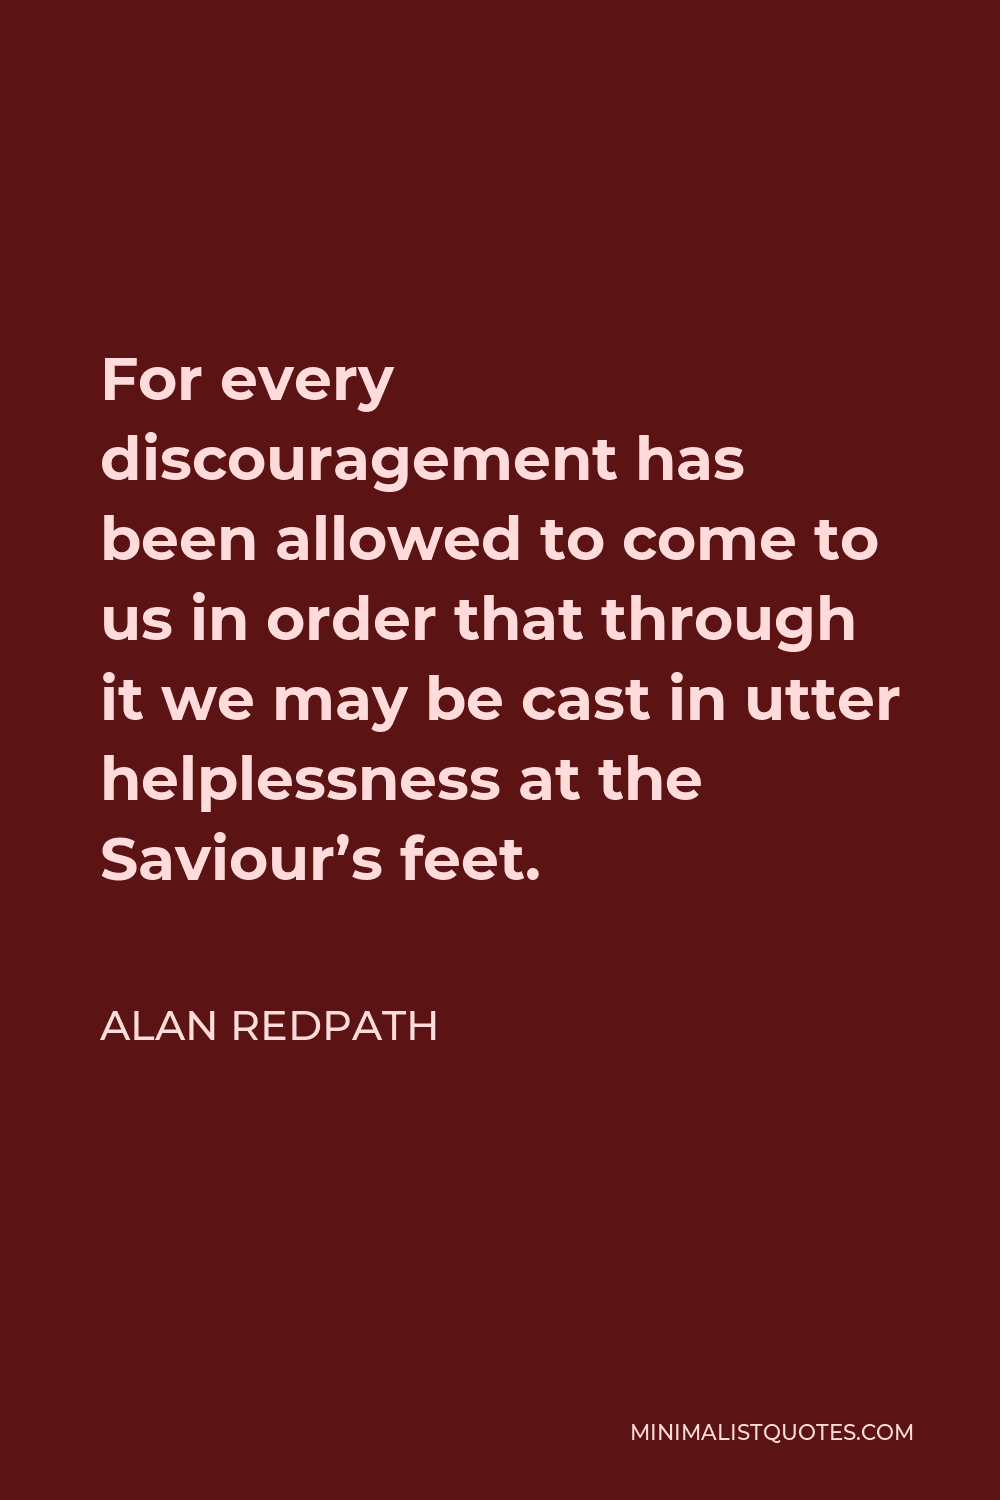 Alan Redpath Quote - For every discouragement has been allowed to come to us in order that through it we may be cast in utter helplessness at the Saviour’s feet.